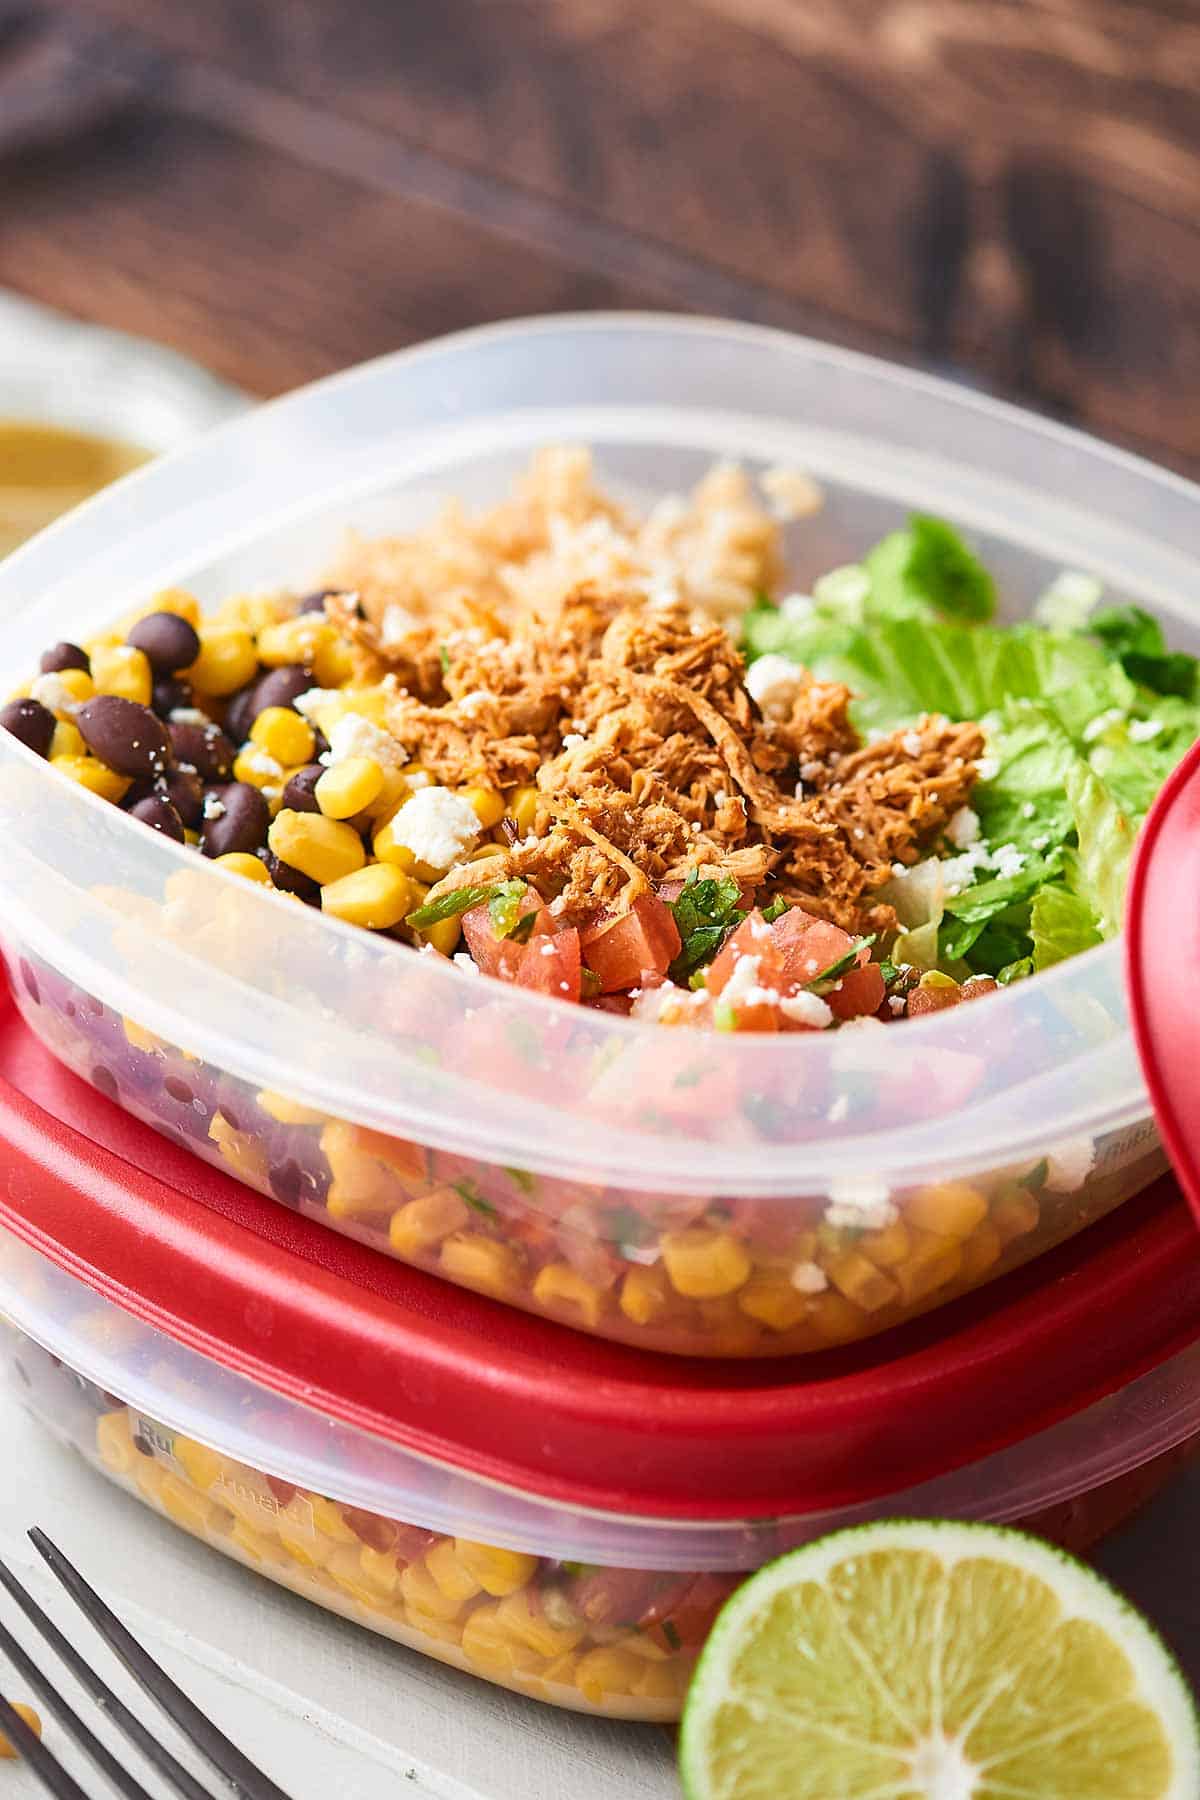 This Chicken Burrito Bowl Recipe is perfect for meal prep! They're quick and easy to make, healthy, gluten free, and loaded with crockpot chicken, beans, corn, a tangy dressing, and more! showmetheyummy.com #burritobowl #mealprep #chicken